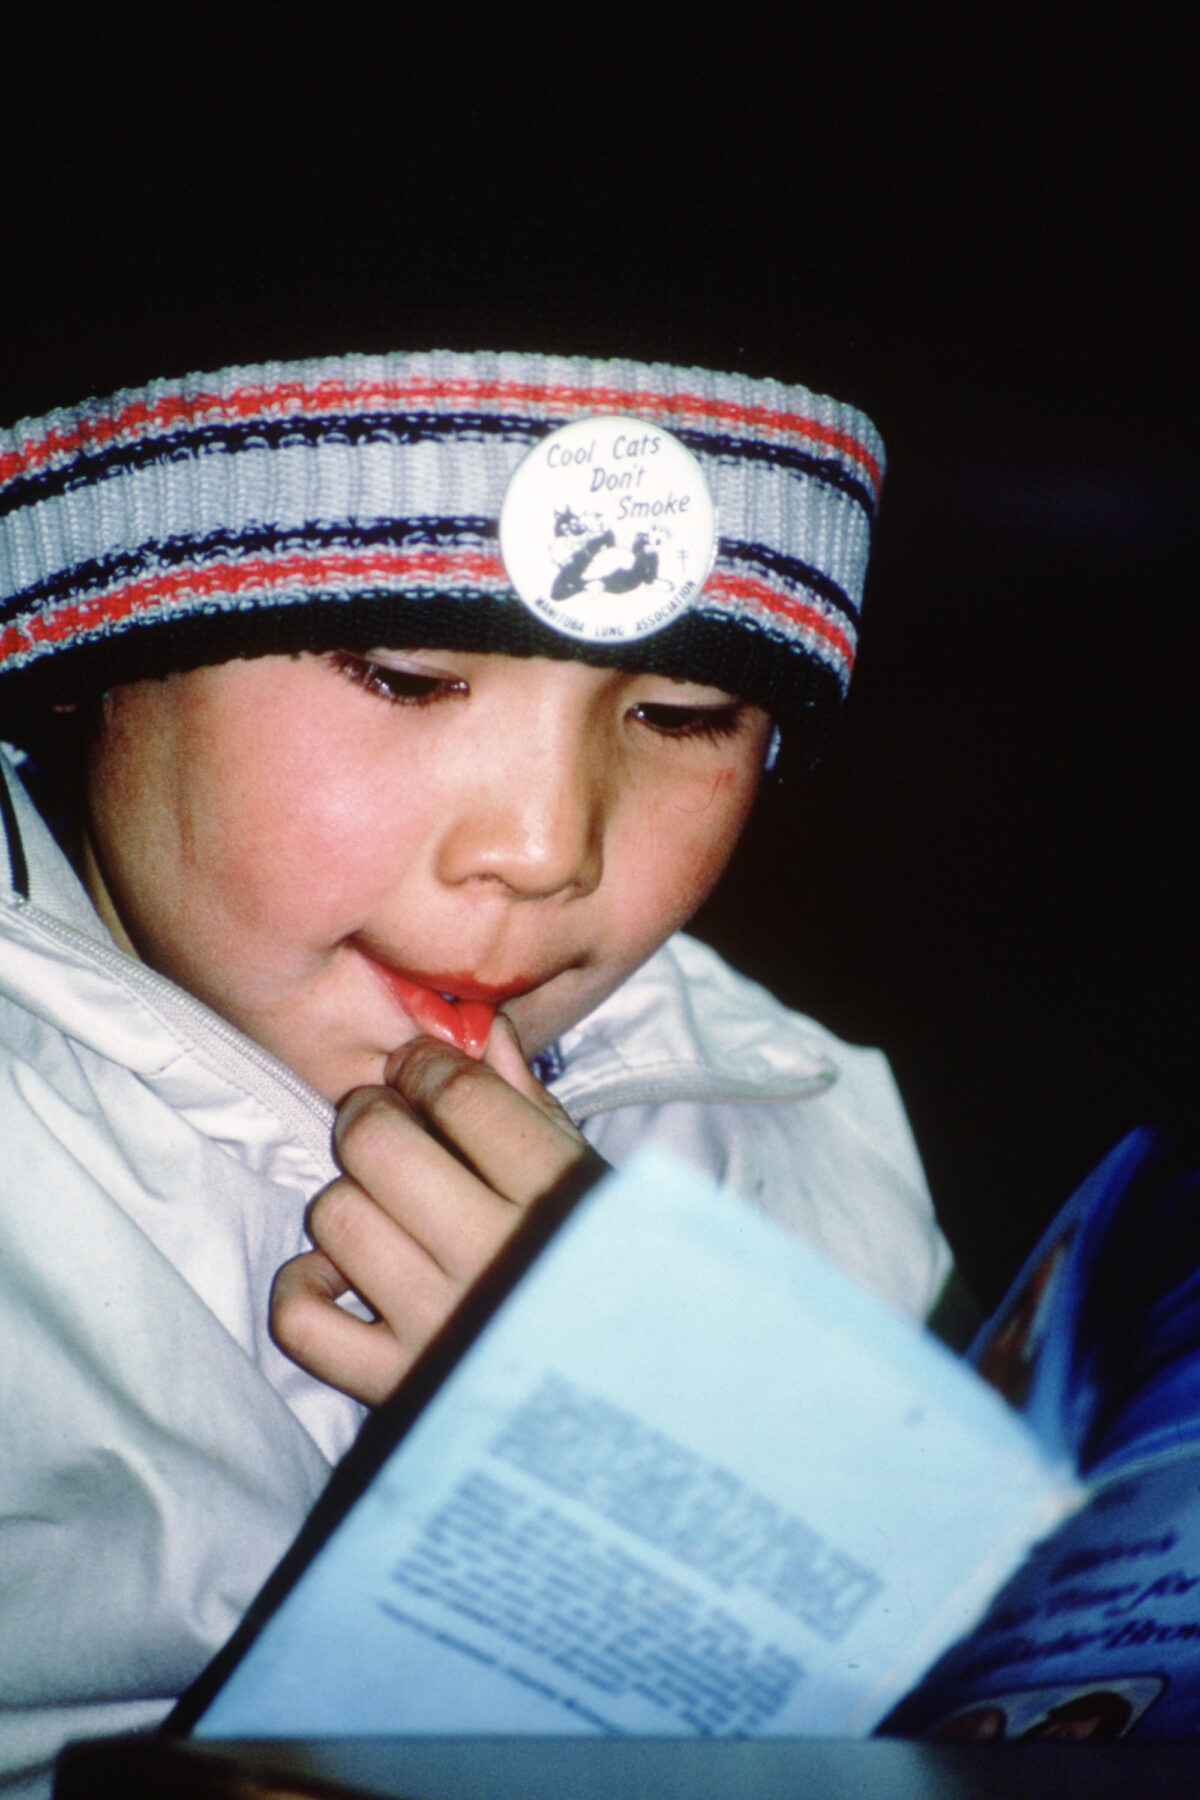 A young child holds their bottom lip while reading a book. A sticker on their hat reads, "Cool Cats Don't Smoke"